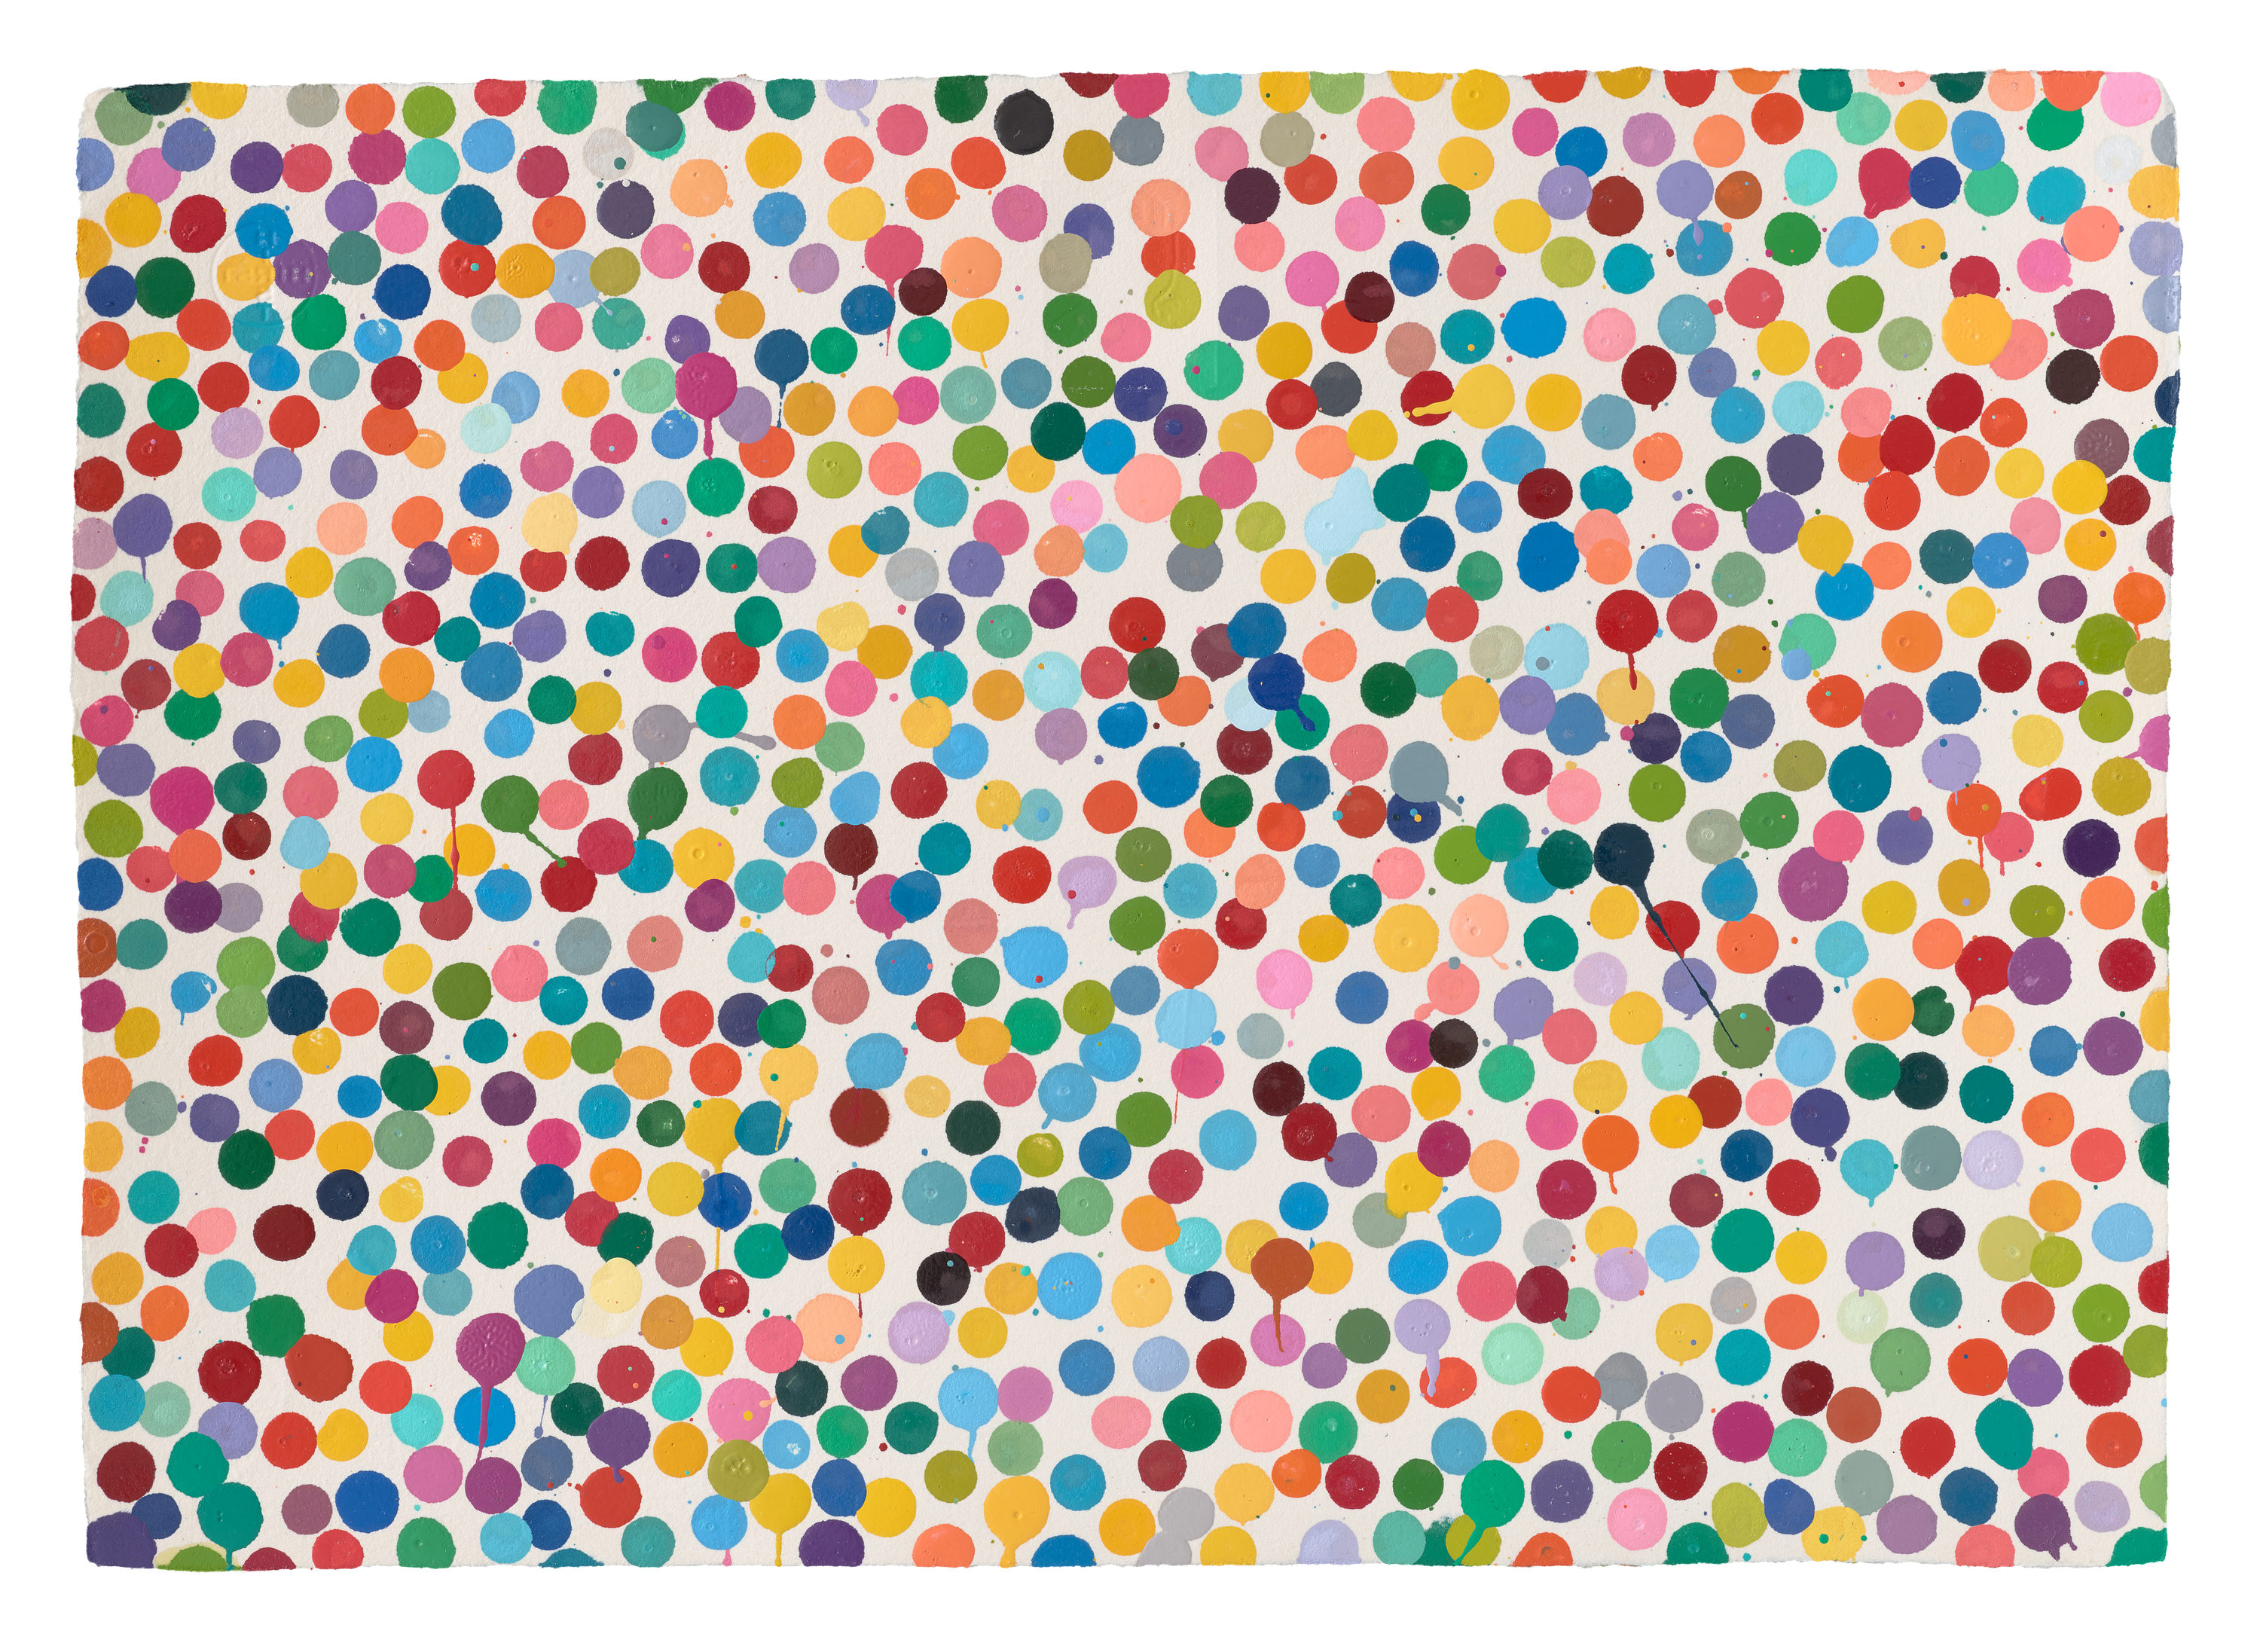 One of the 10,000 pieces from Damien Hirst’s first art project utilizing NFTs. (Source)